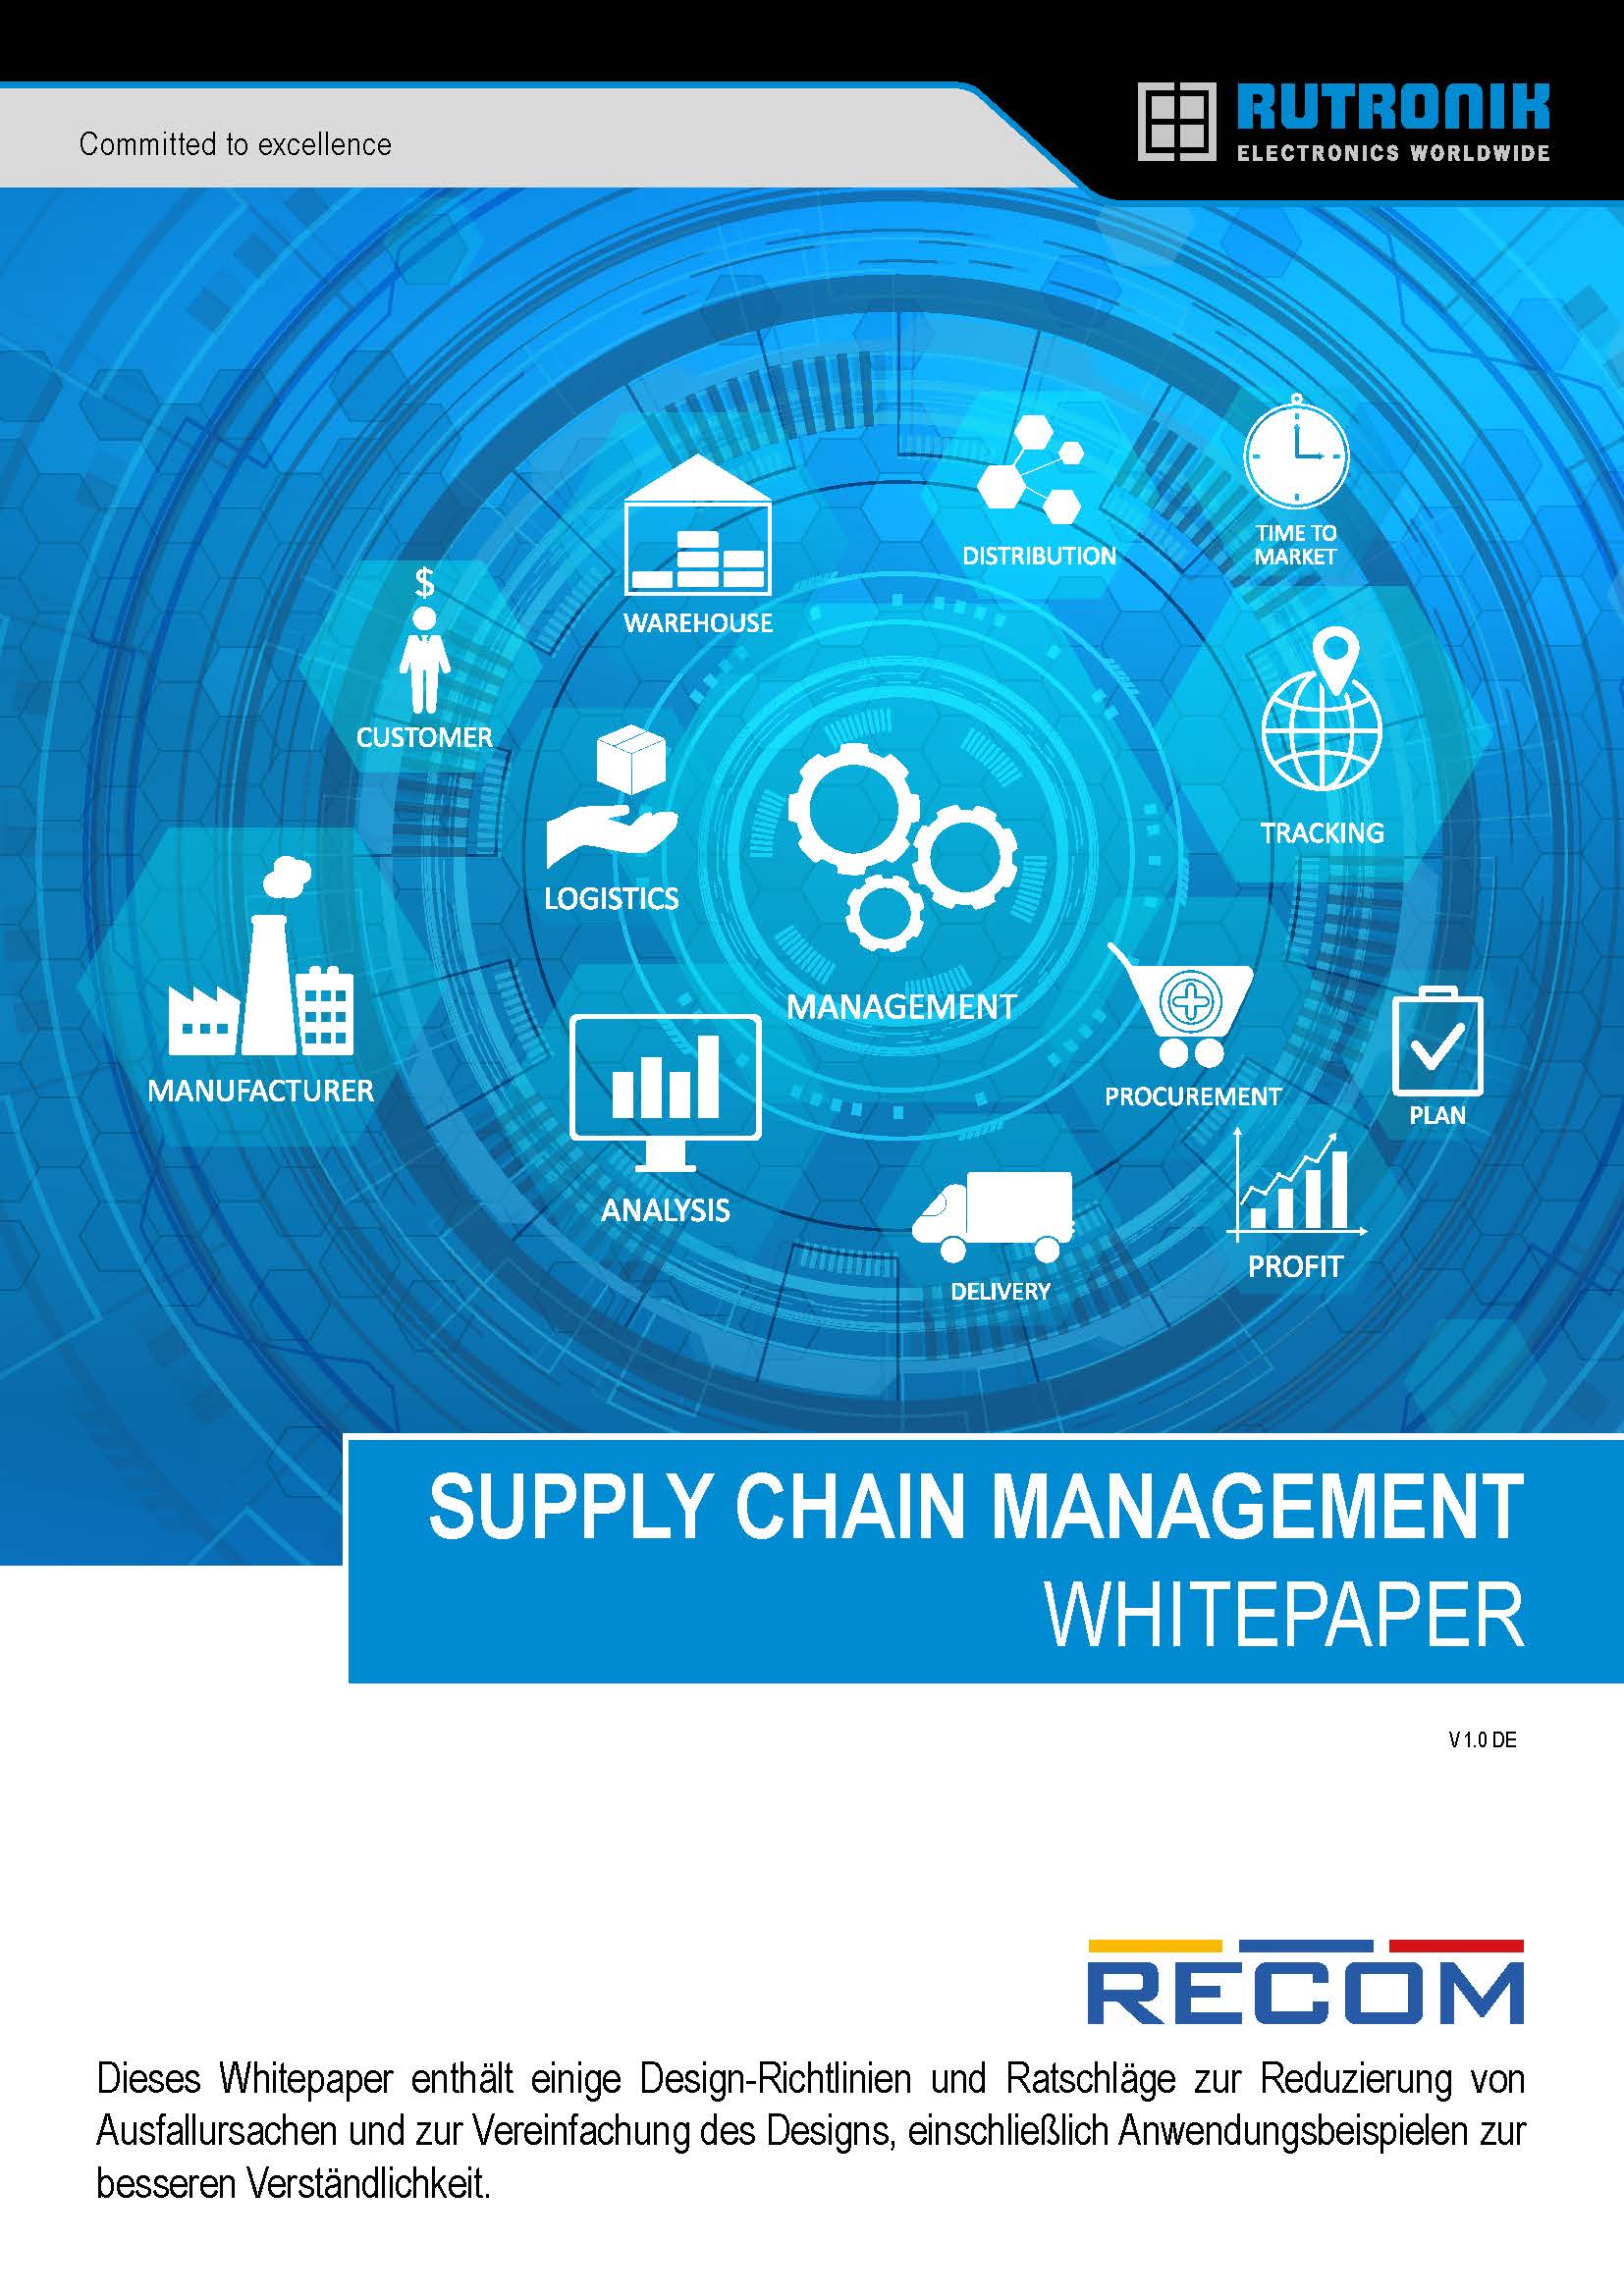 White Paper on Supply Chain Management